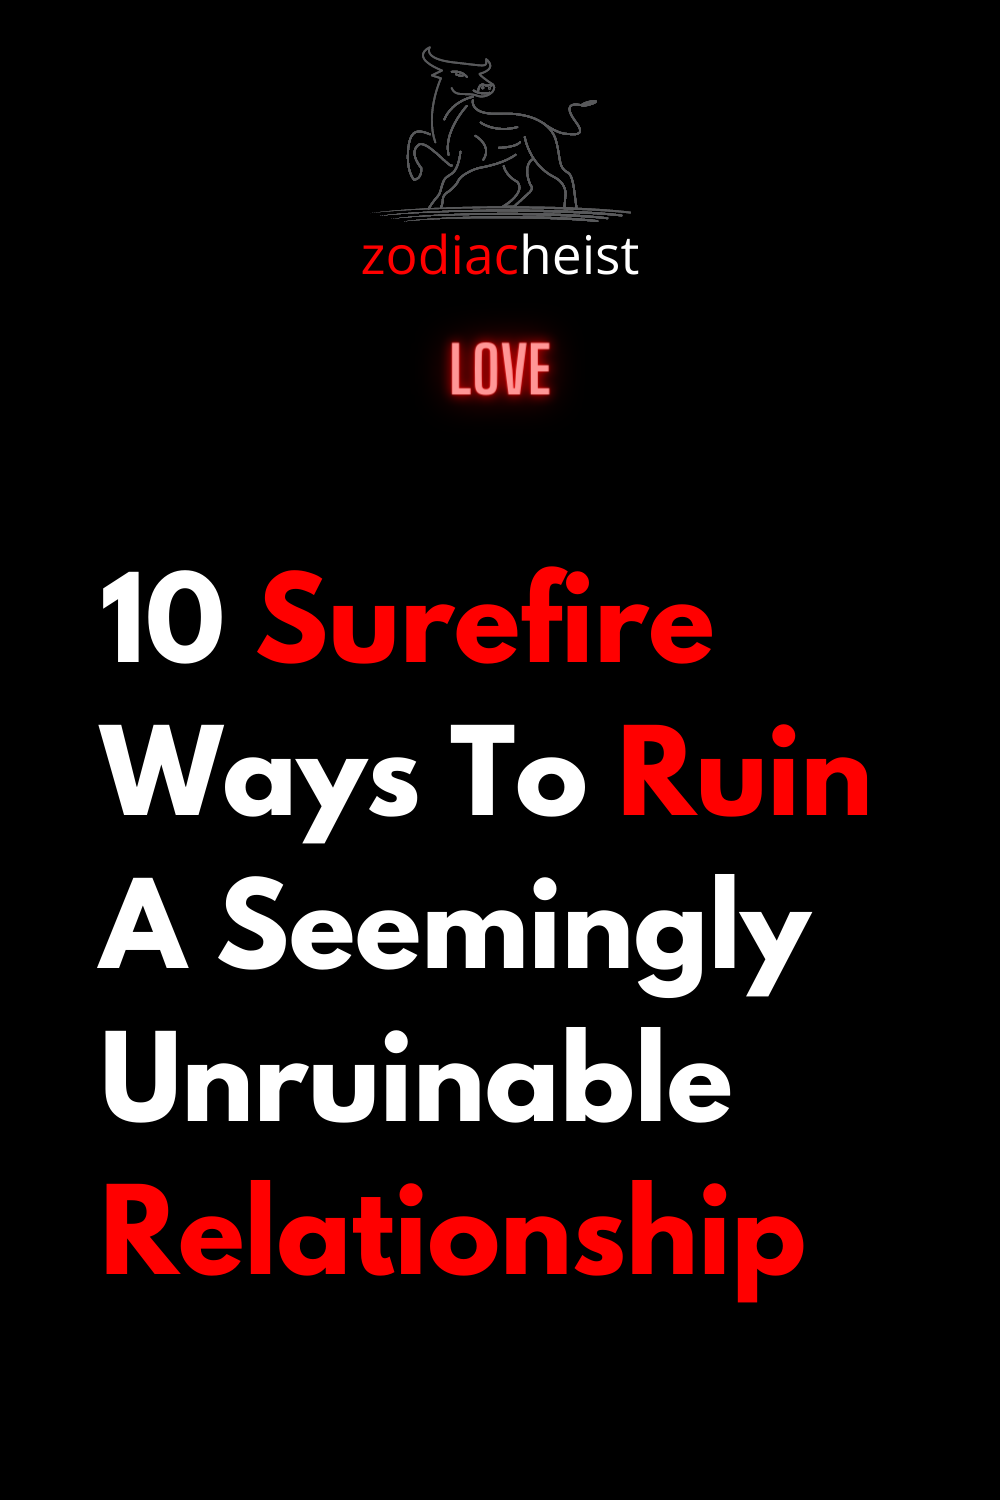 10 Surefire Ways To Ruin A Seemingly Unruinable Relationship